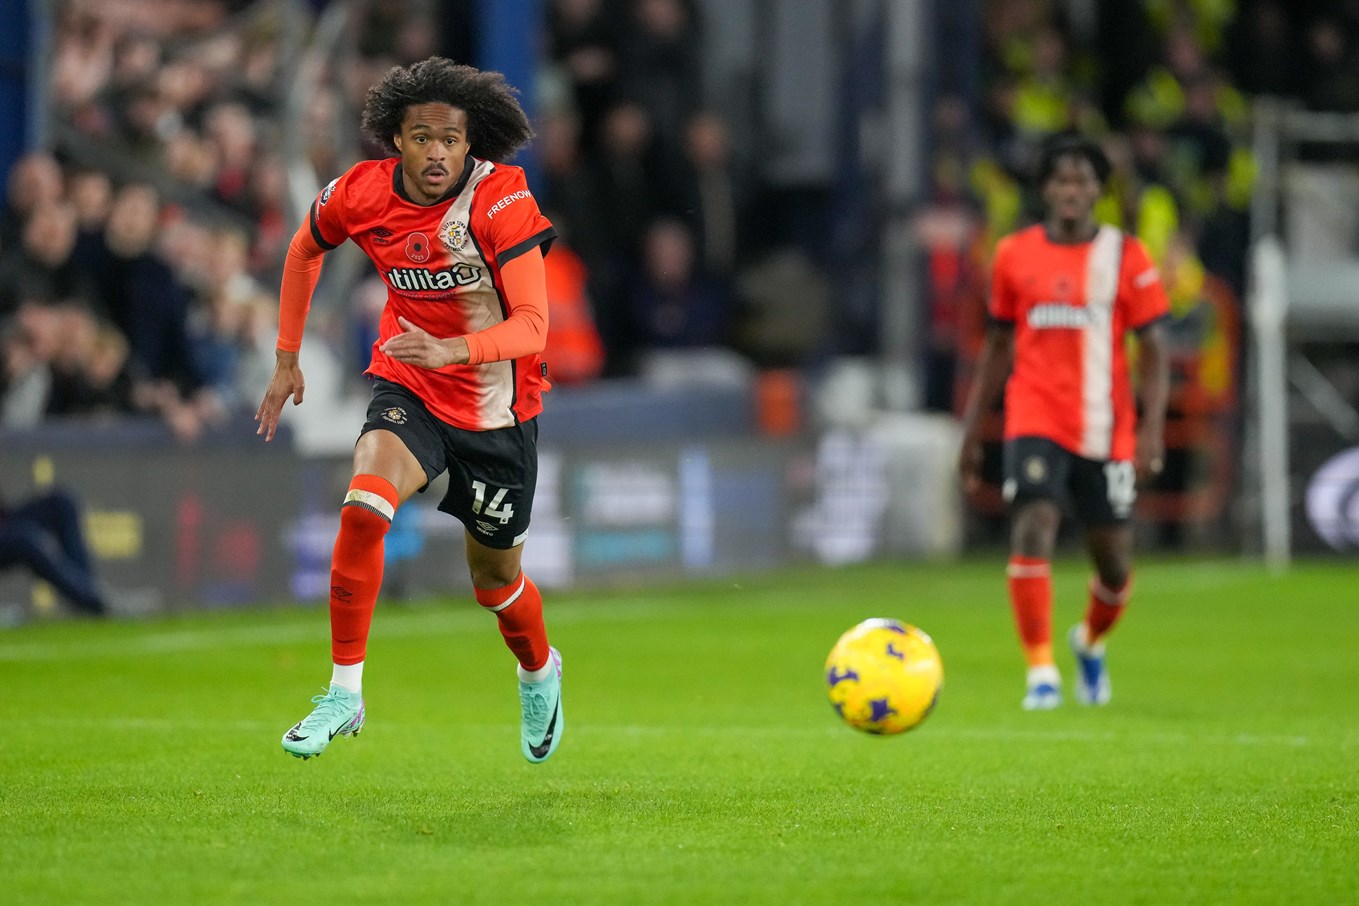 Tahith Chong running with the ball against Liverpool.